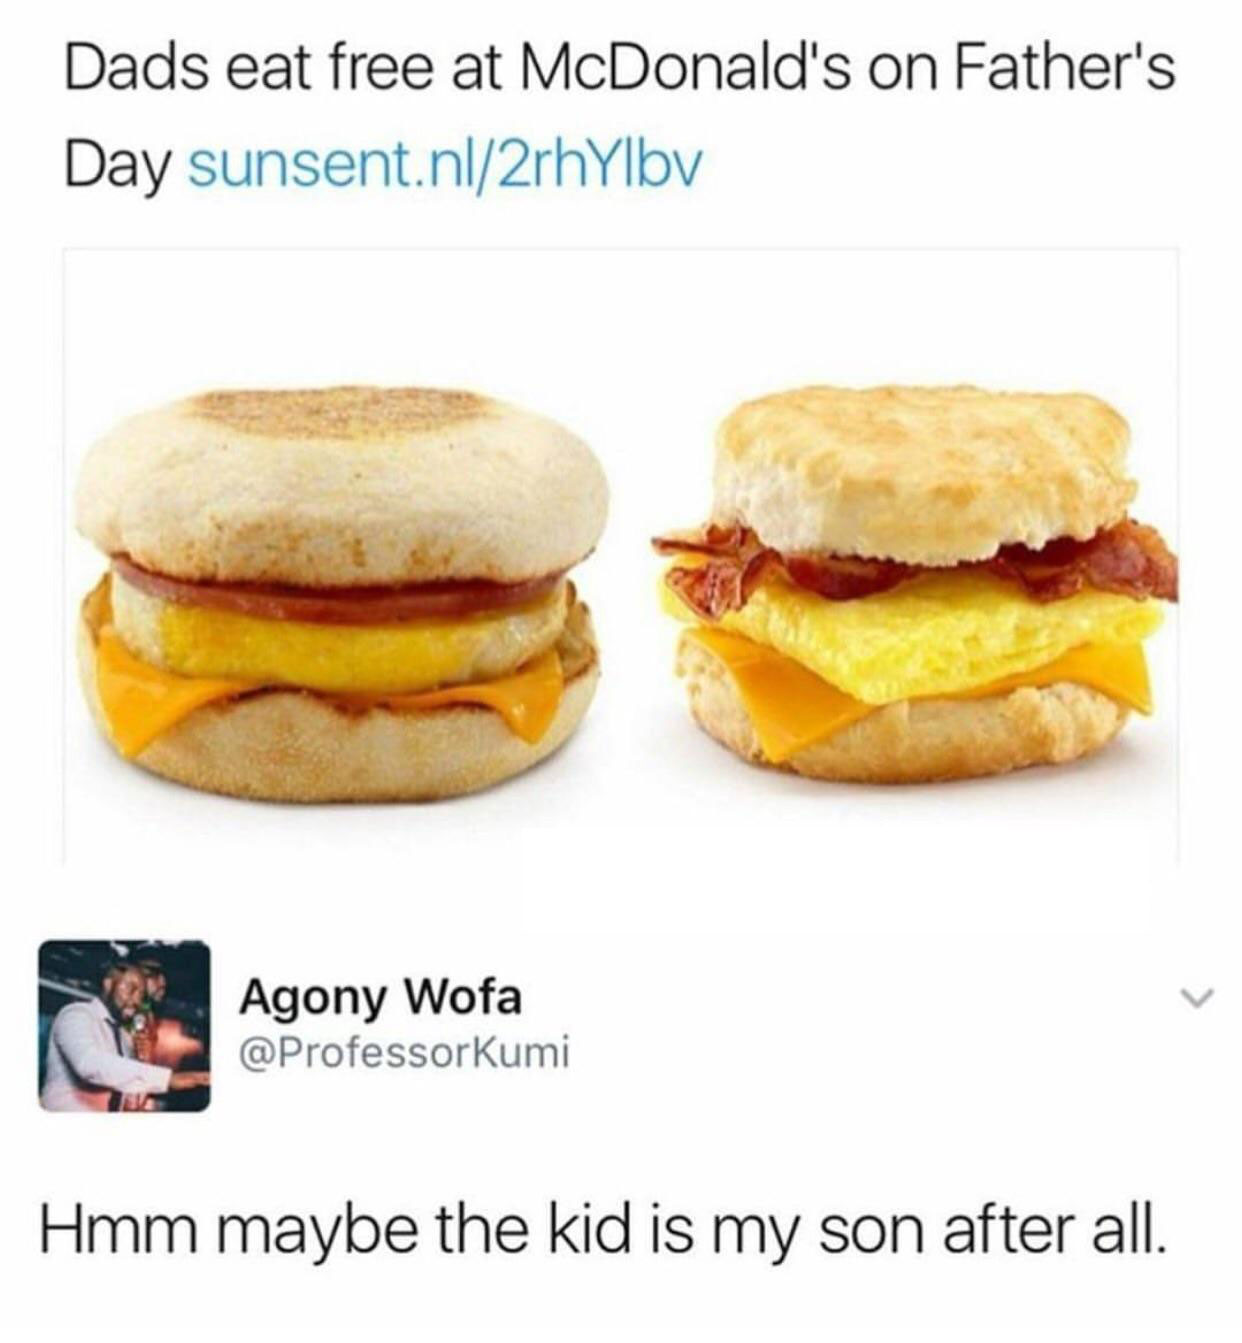 Dads get free father's day at McDonalds